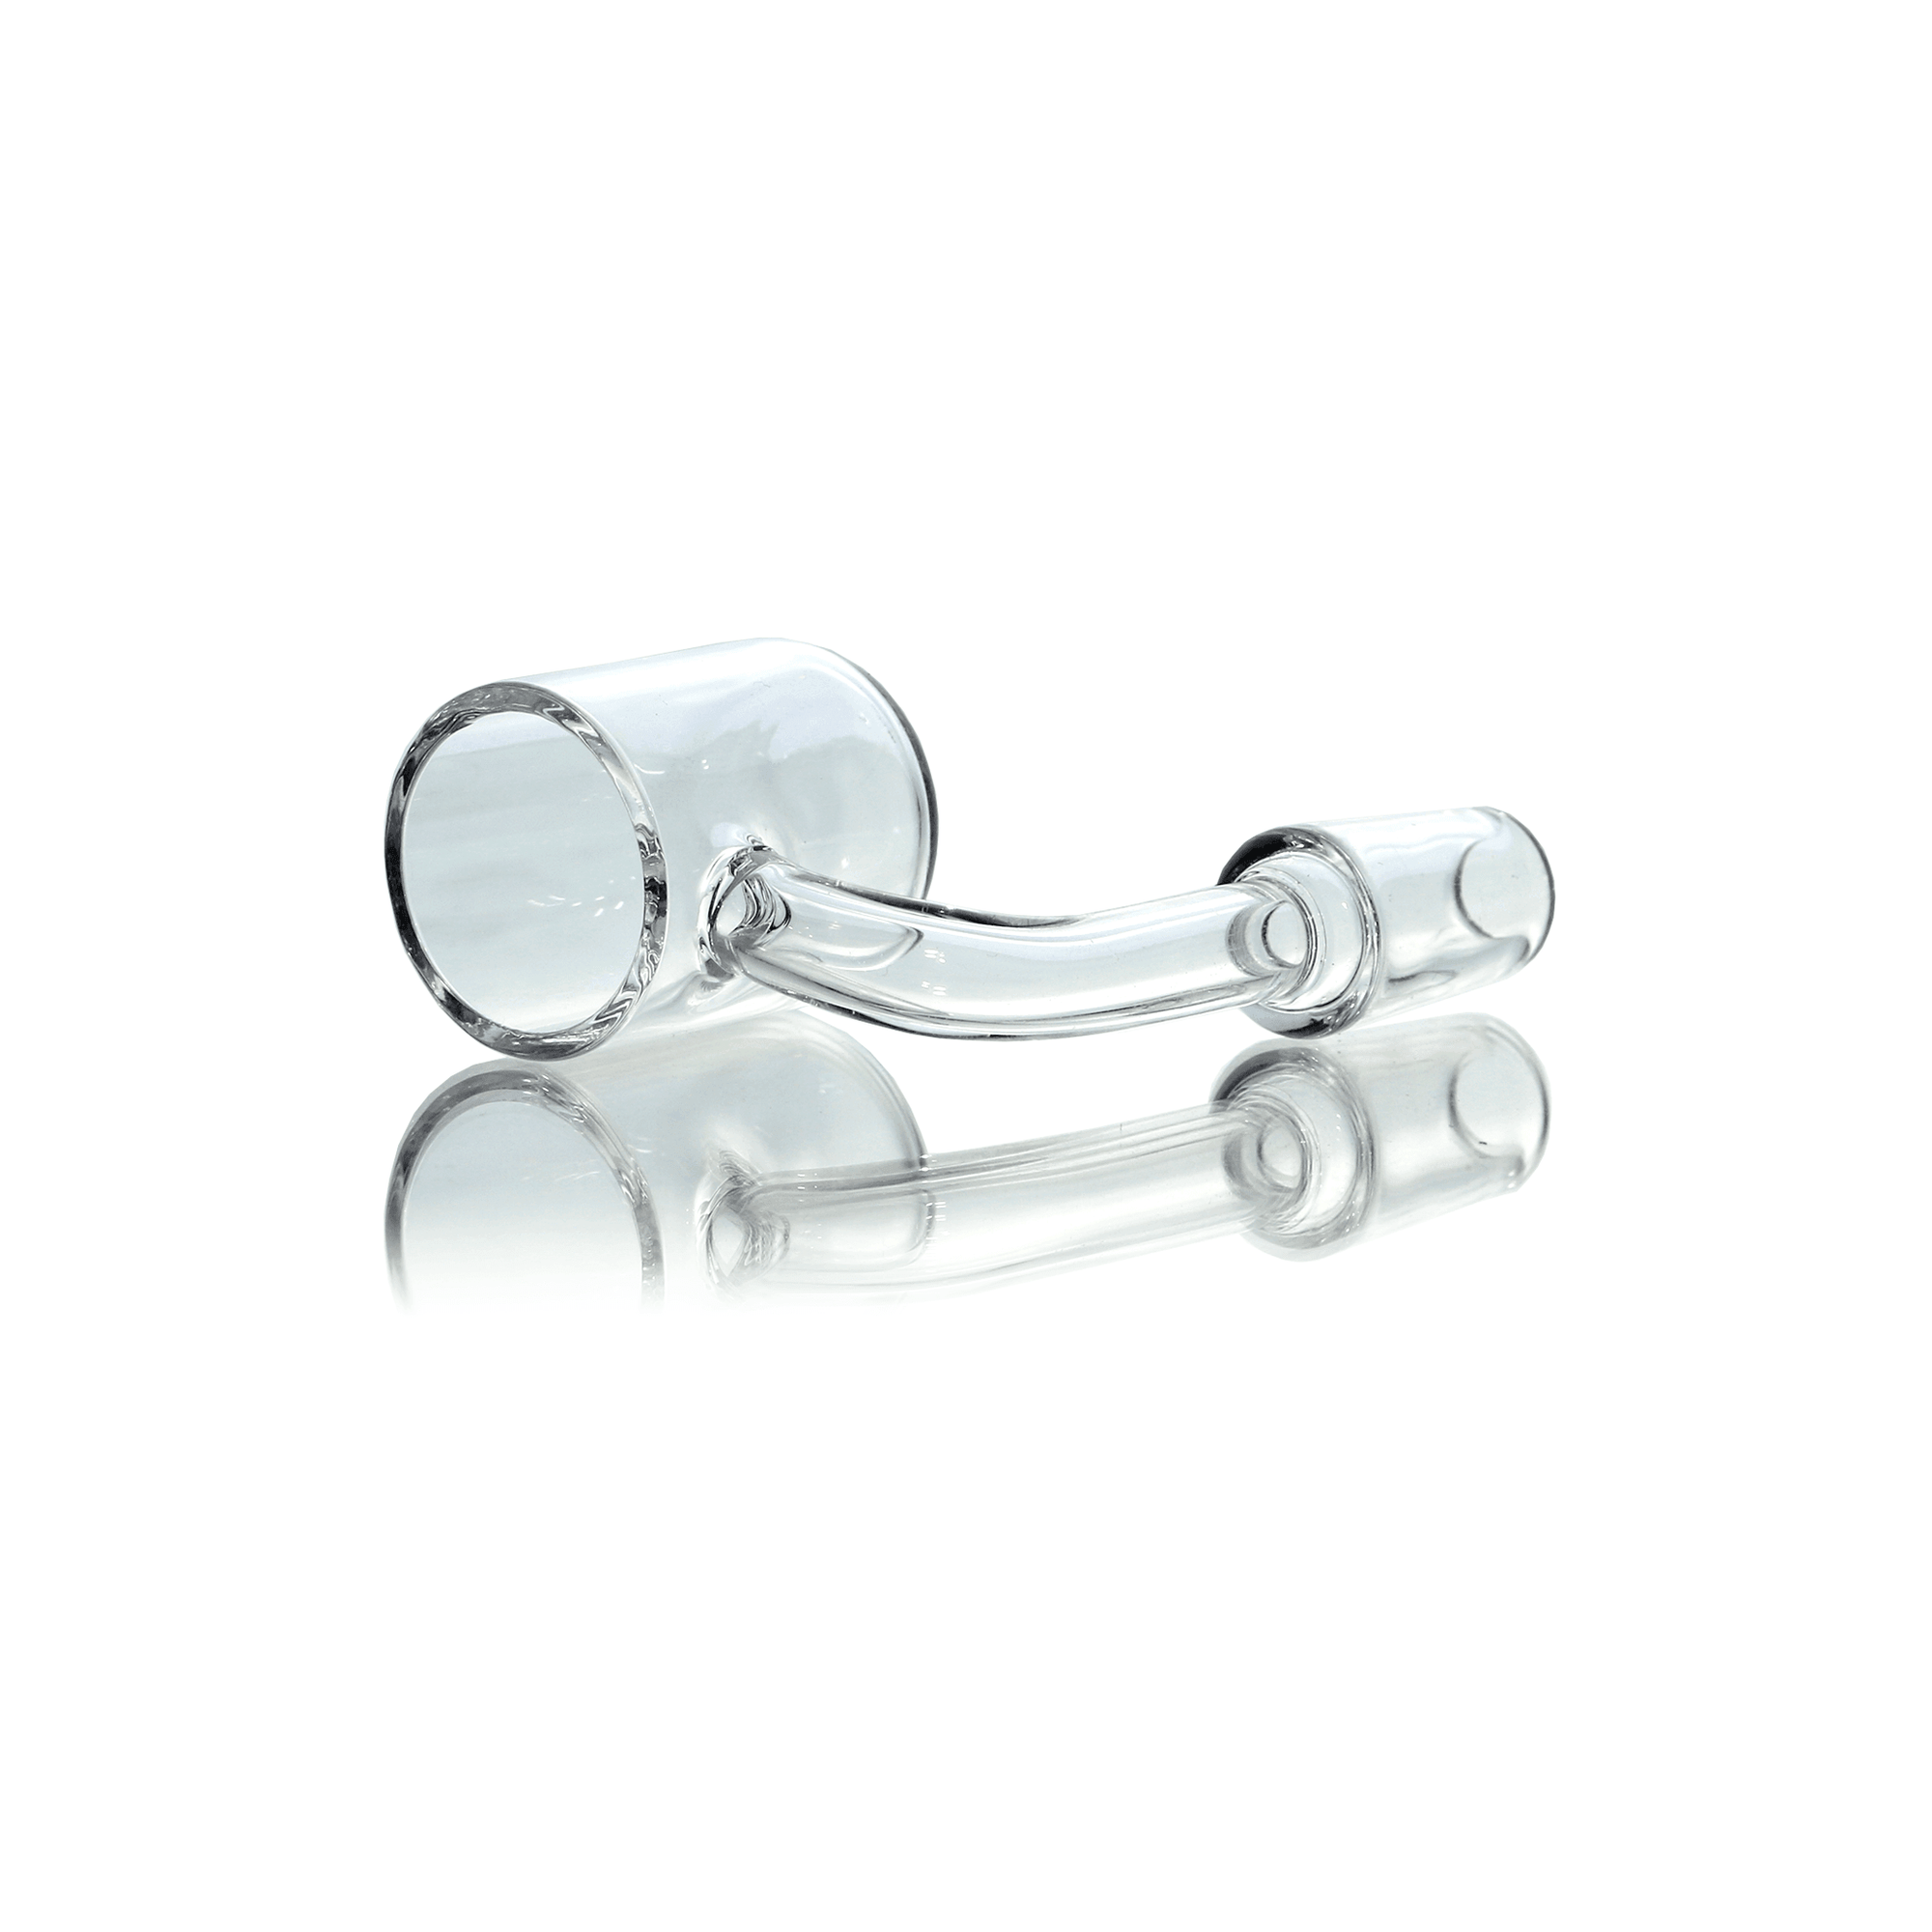 25mm Flat Top Quartz Banger | Rounded Bottom | Insert Cup | the dabbing specialists